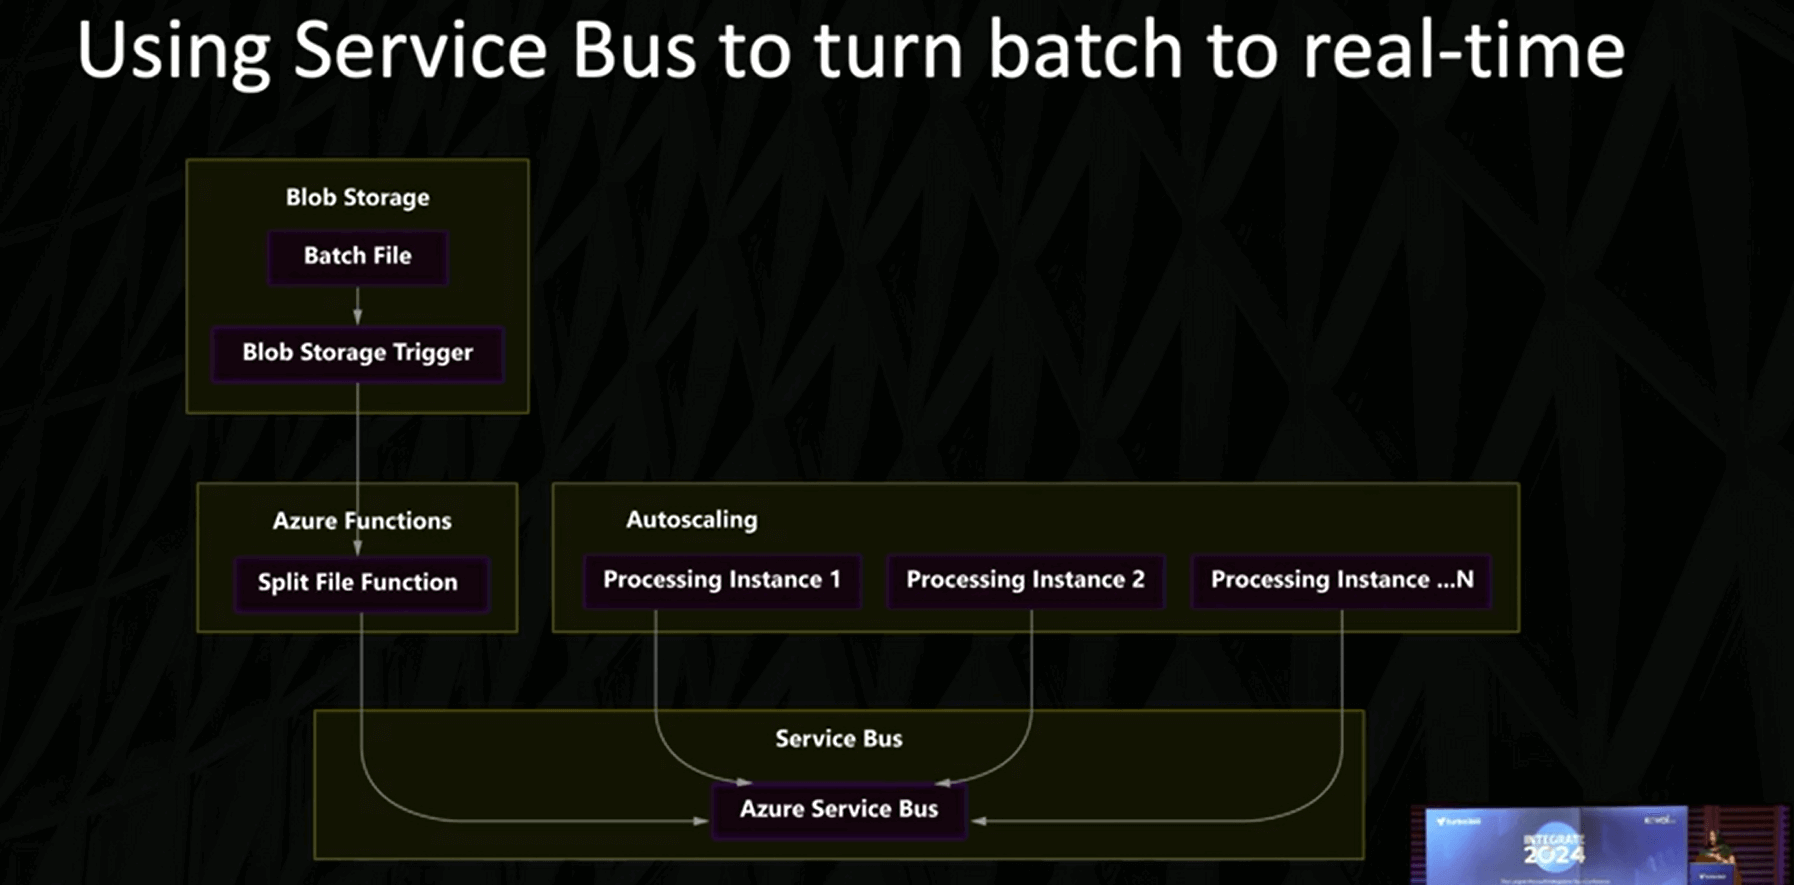 Using Service bus to turn batch to real-time